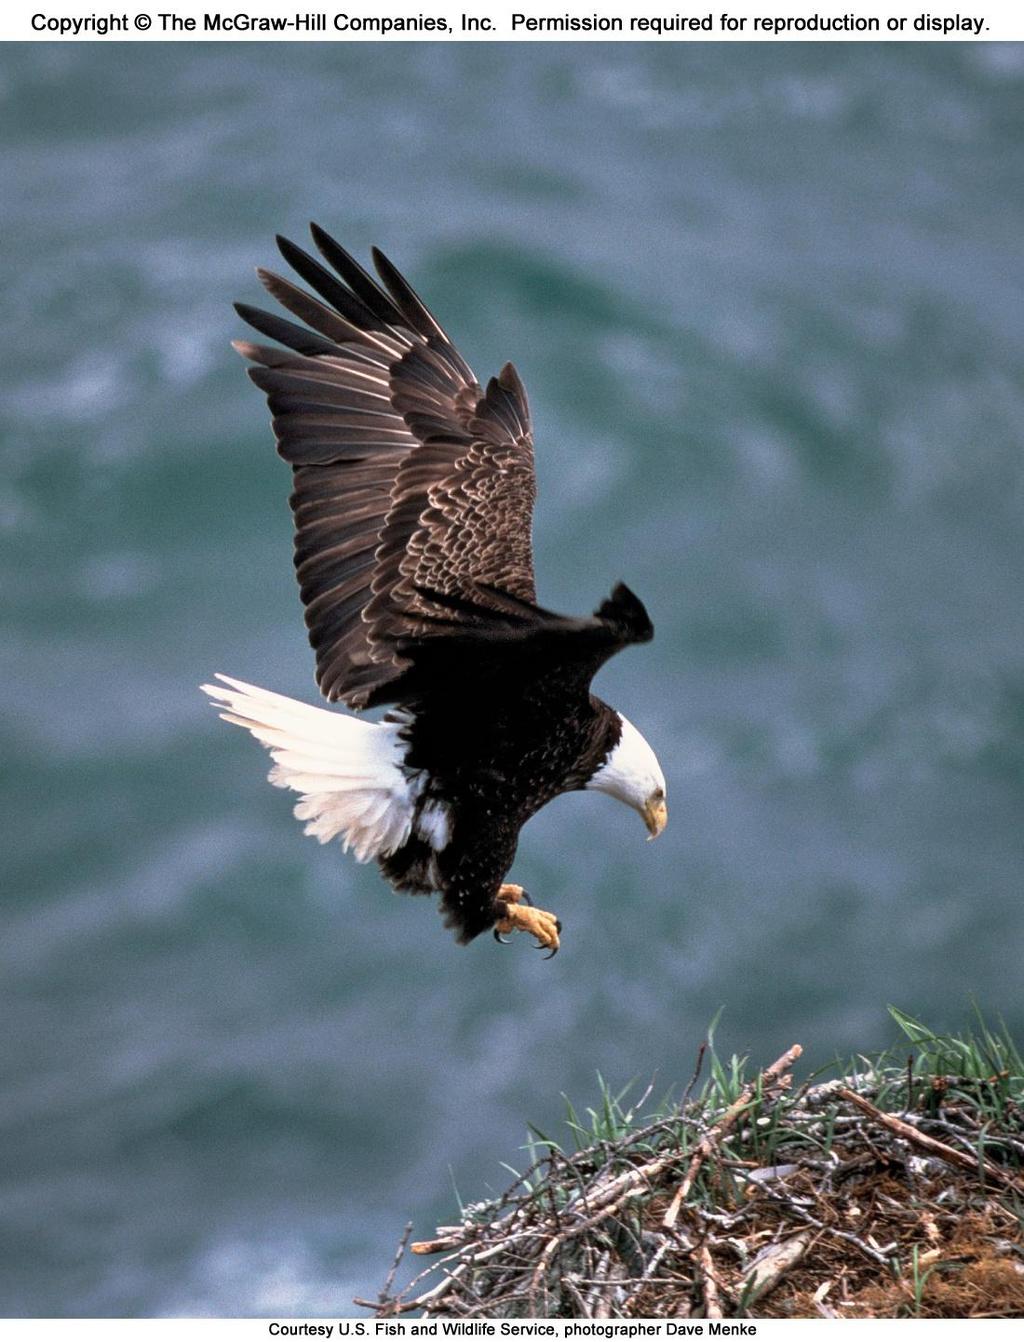 The Bald Eagle is one of